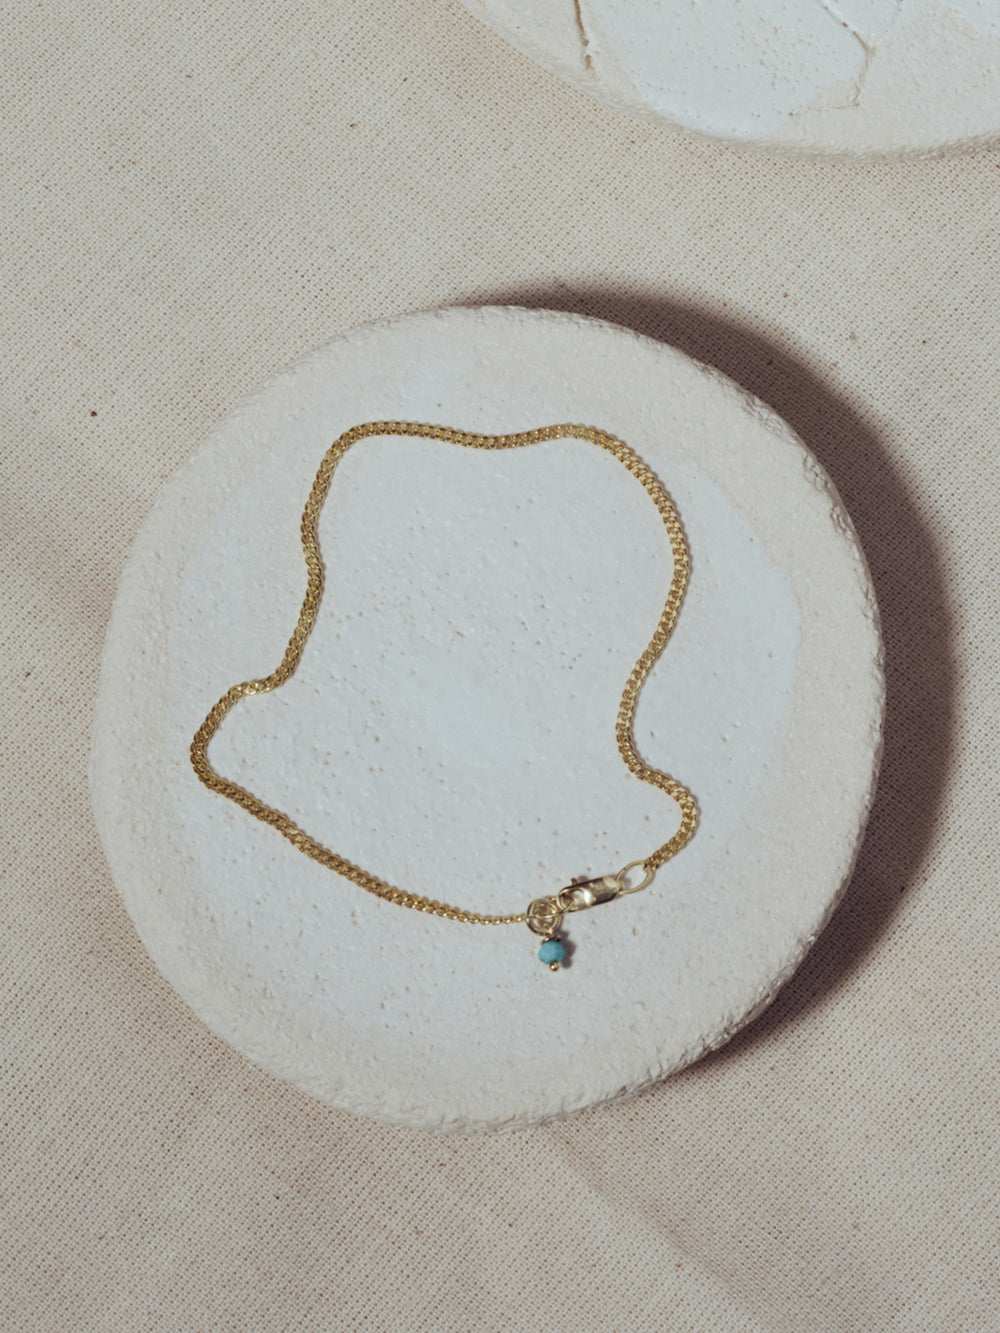 Birthstone December - Turquoise | 14K Solid Gold